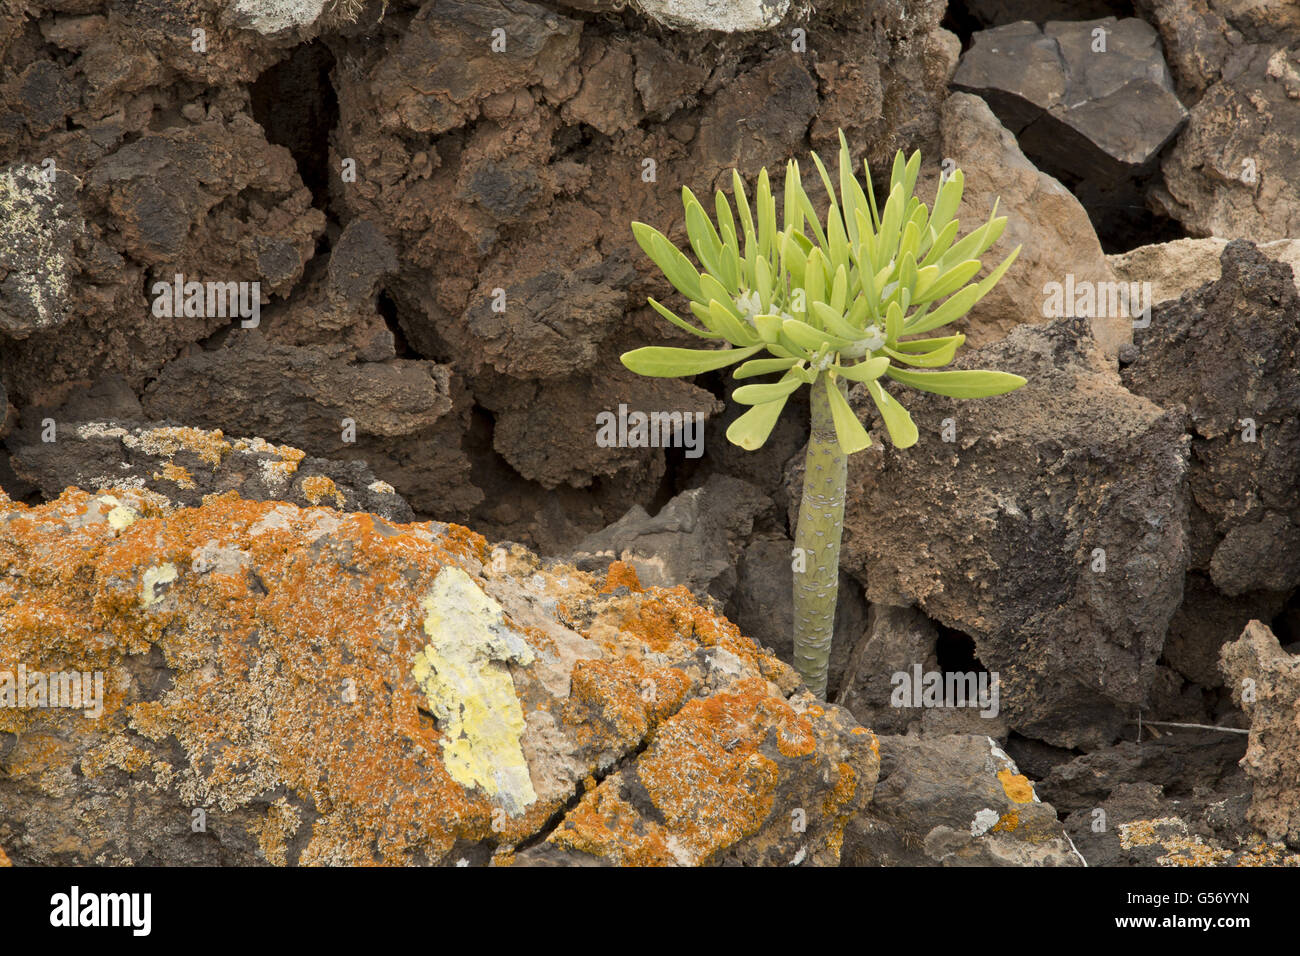 Verode (Kleinia neriifolia) young, growing in dry area amongst volcanic rocks, Lanzarote, Canary Islands, March Stock Photo